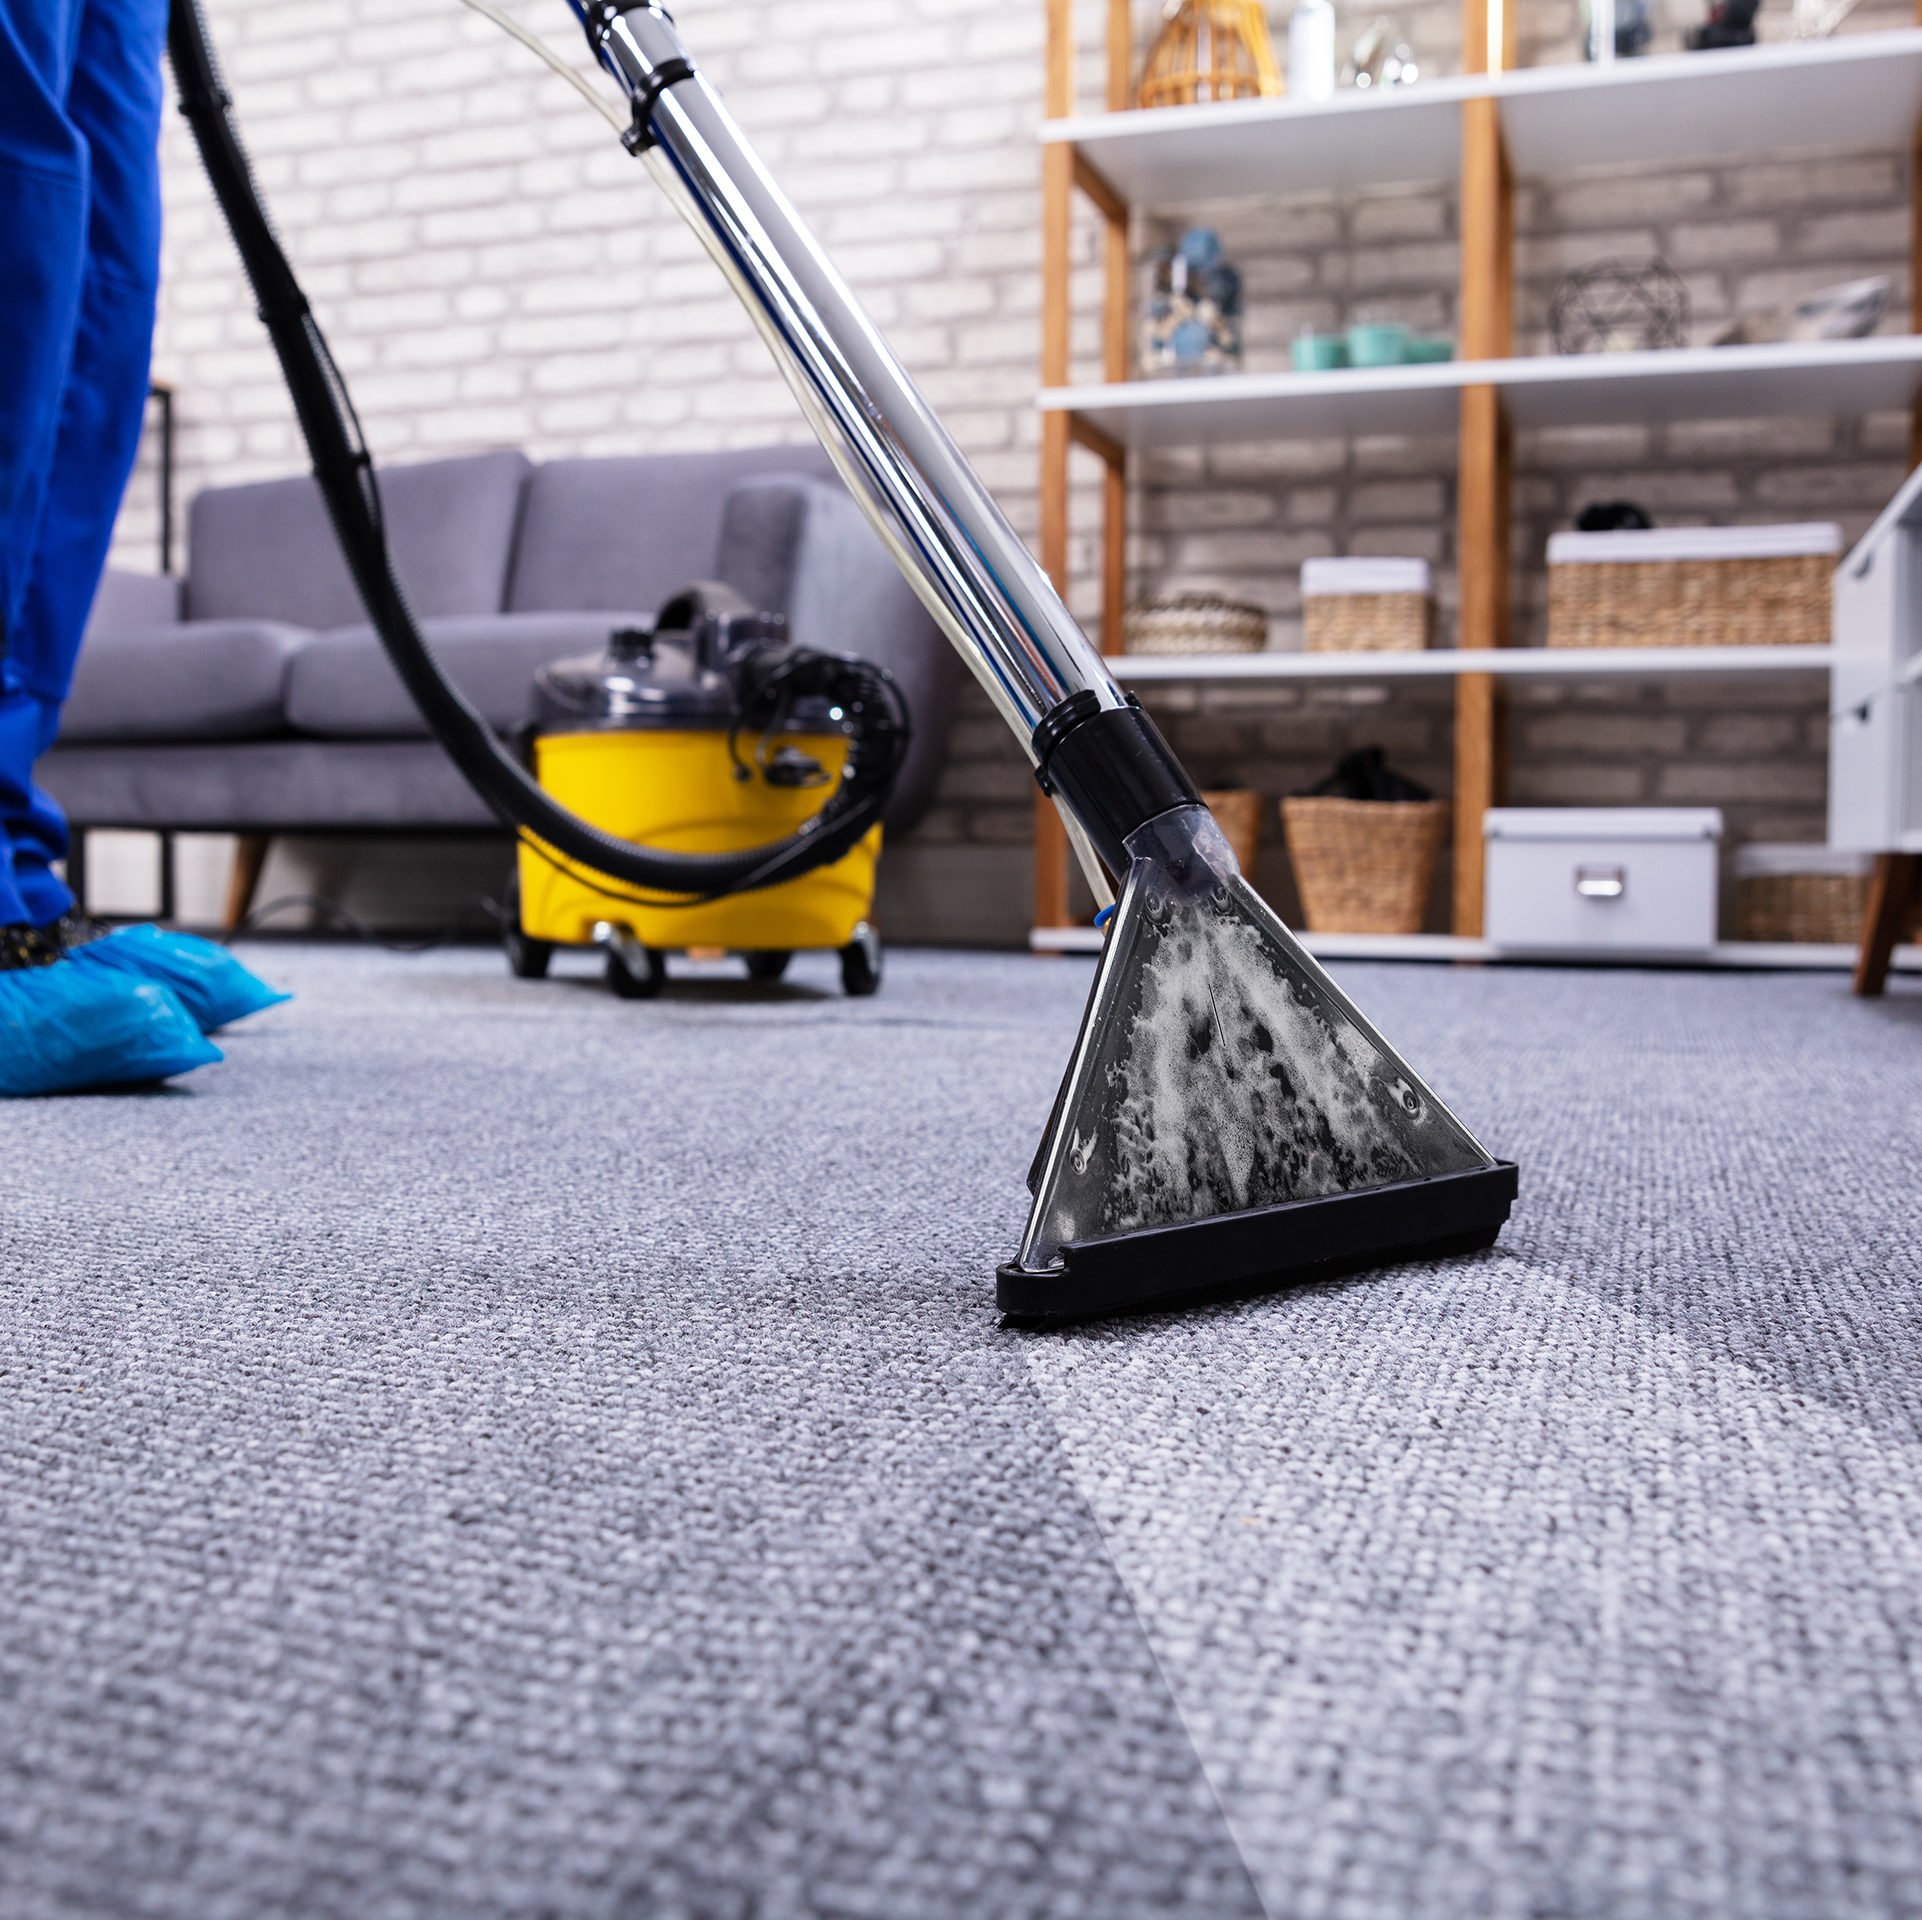 Rug Cleaning, Professional Carpet Cleaning, Carpet and Upholstery Cleaning, Carpet Dry Express, Devizes, Wiltshire